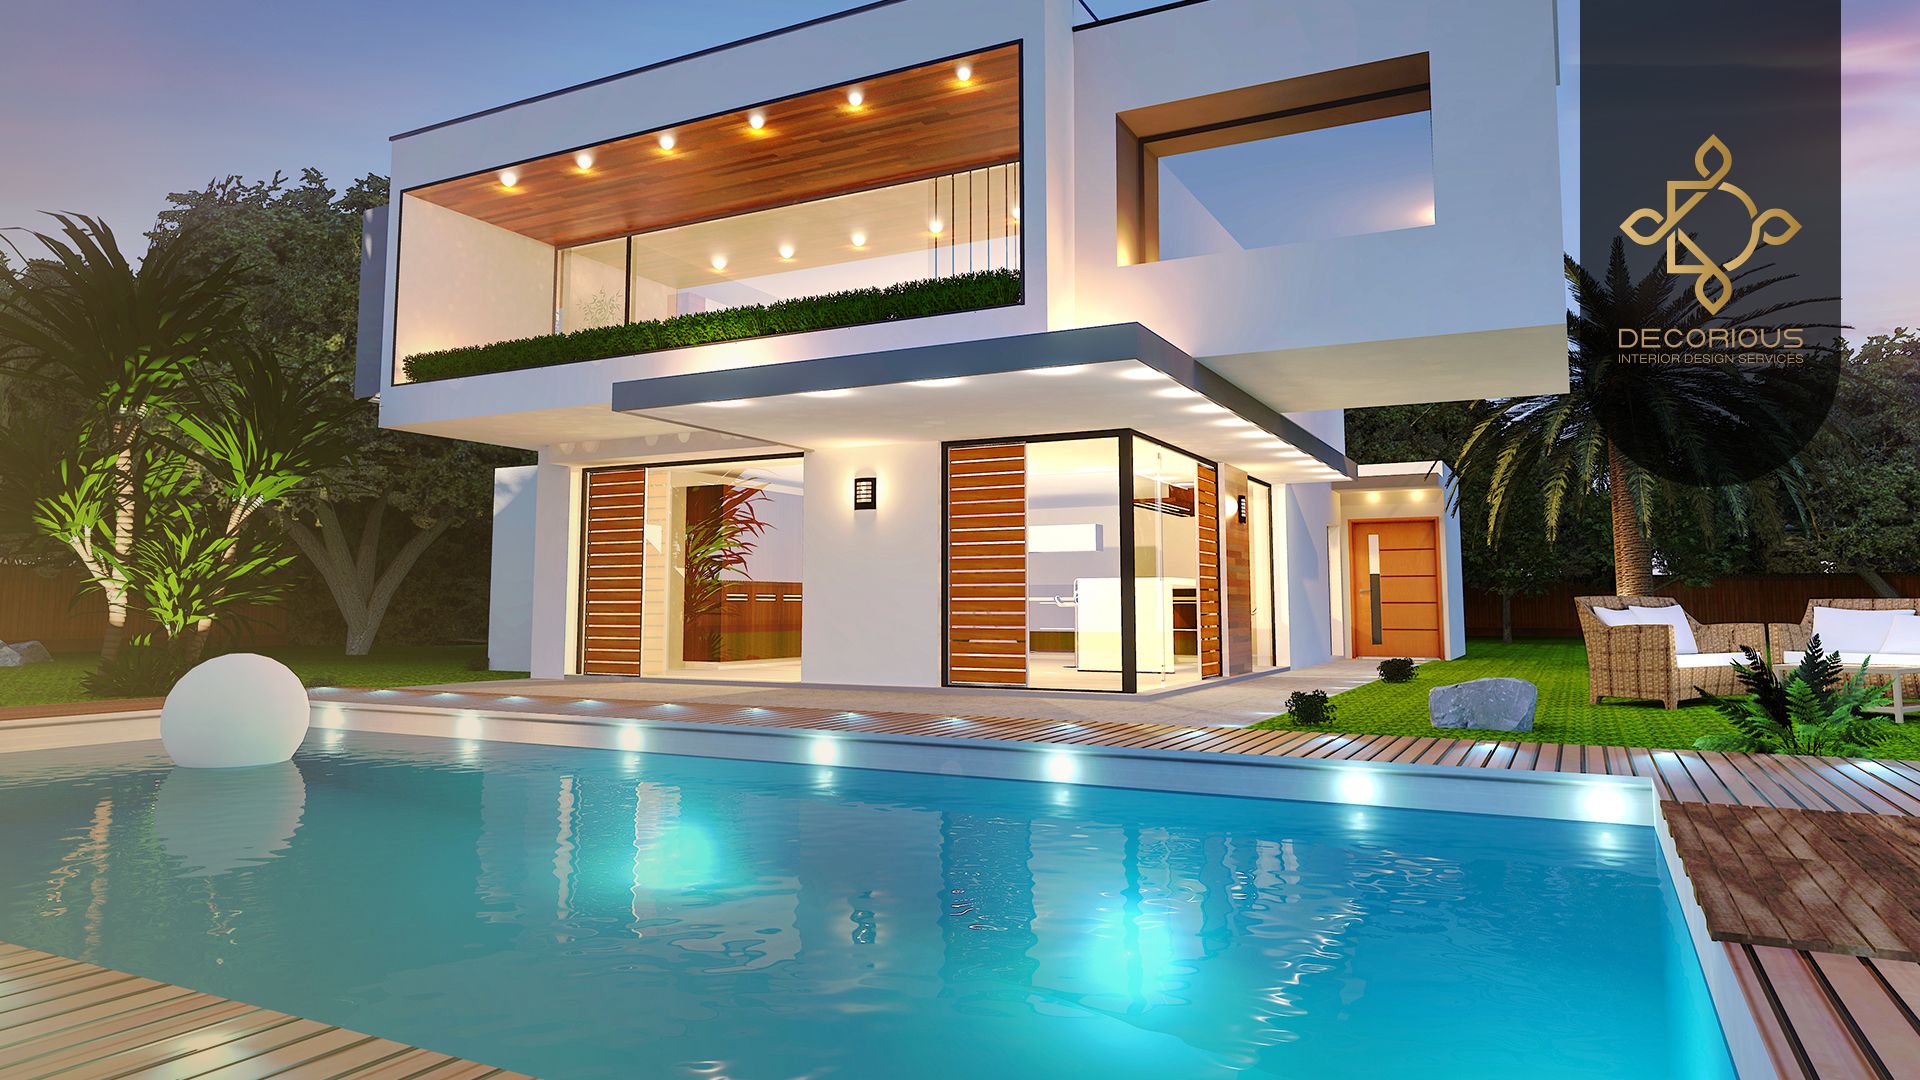 Things to Consider When Designing Your Swimming Pool